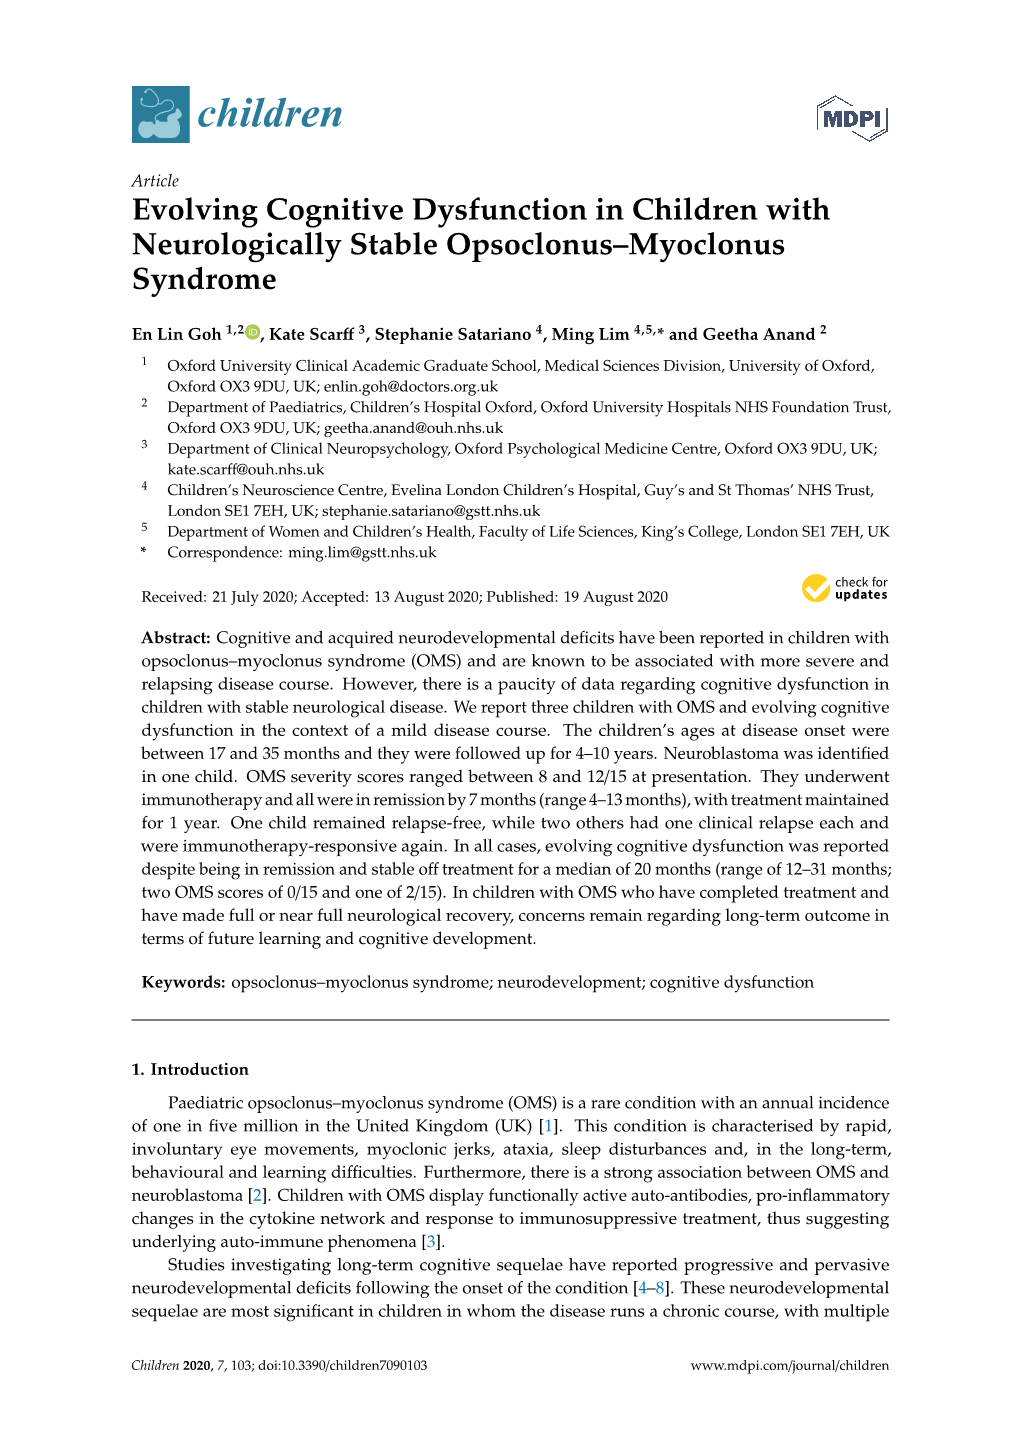 Evolving Cognitive Dysfunction in Children with Neurologically Stable Opsoclonus–Myoclonus Syndrome